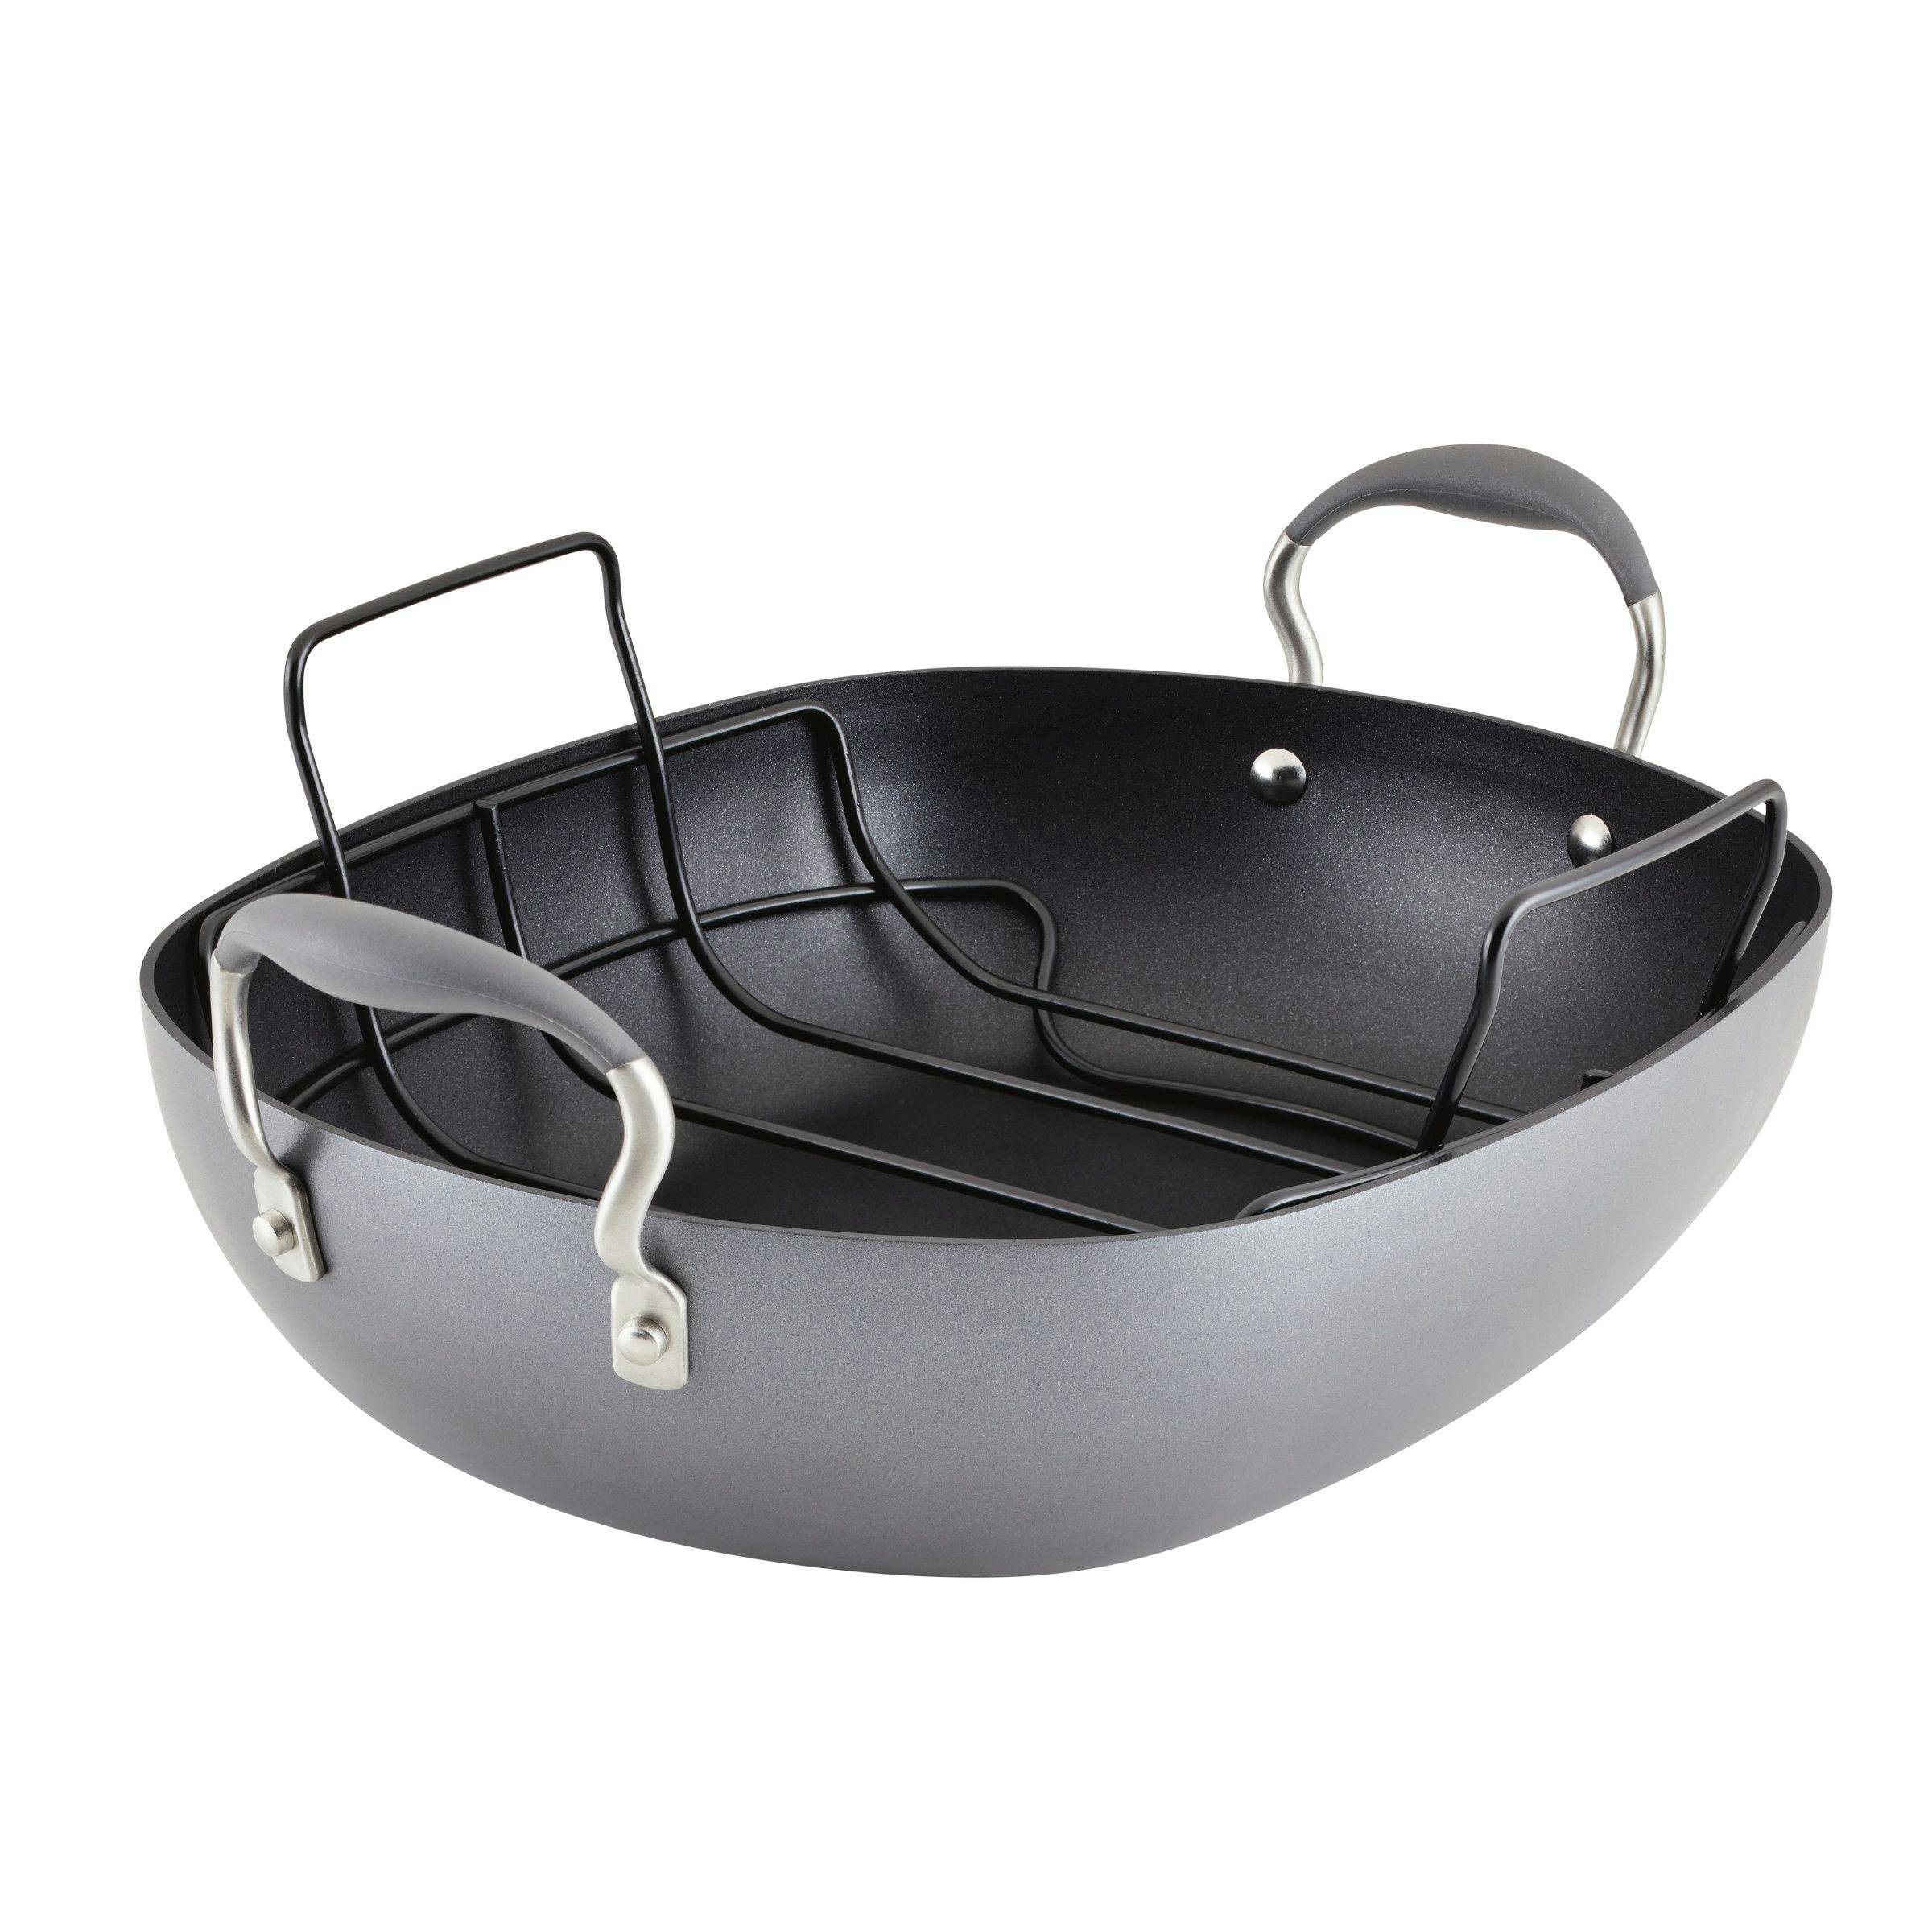 Anolon Advanced Hard Anodized Nonstick Roaster with Rack, Dark Gray